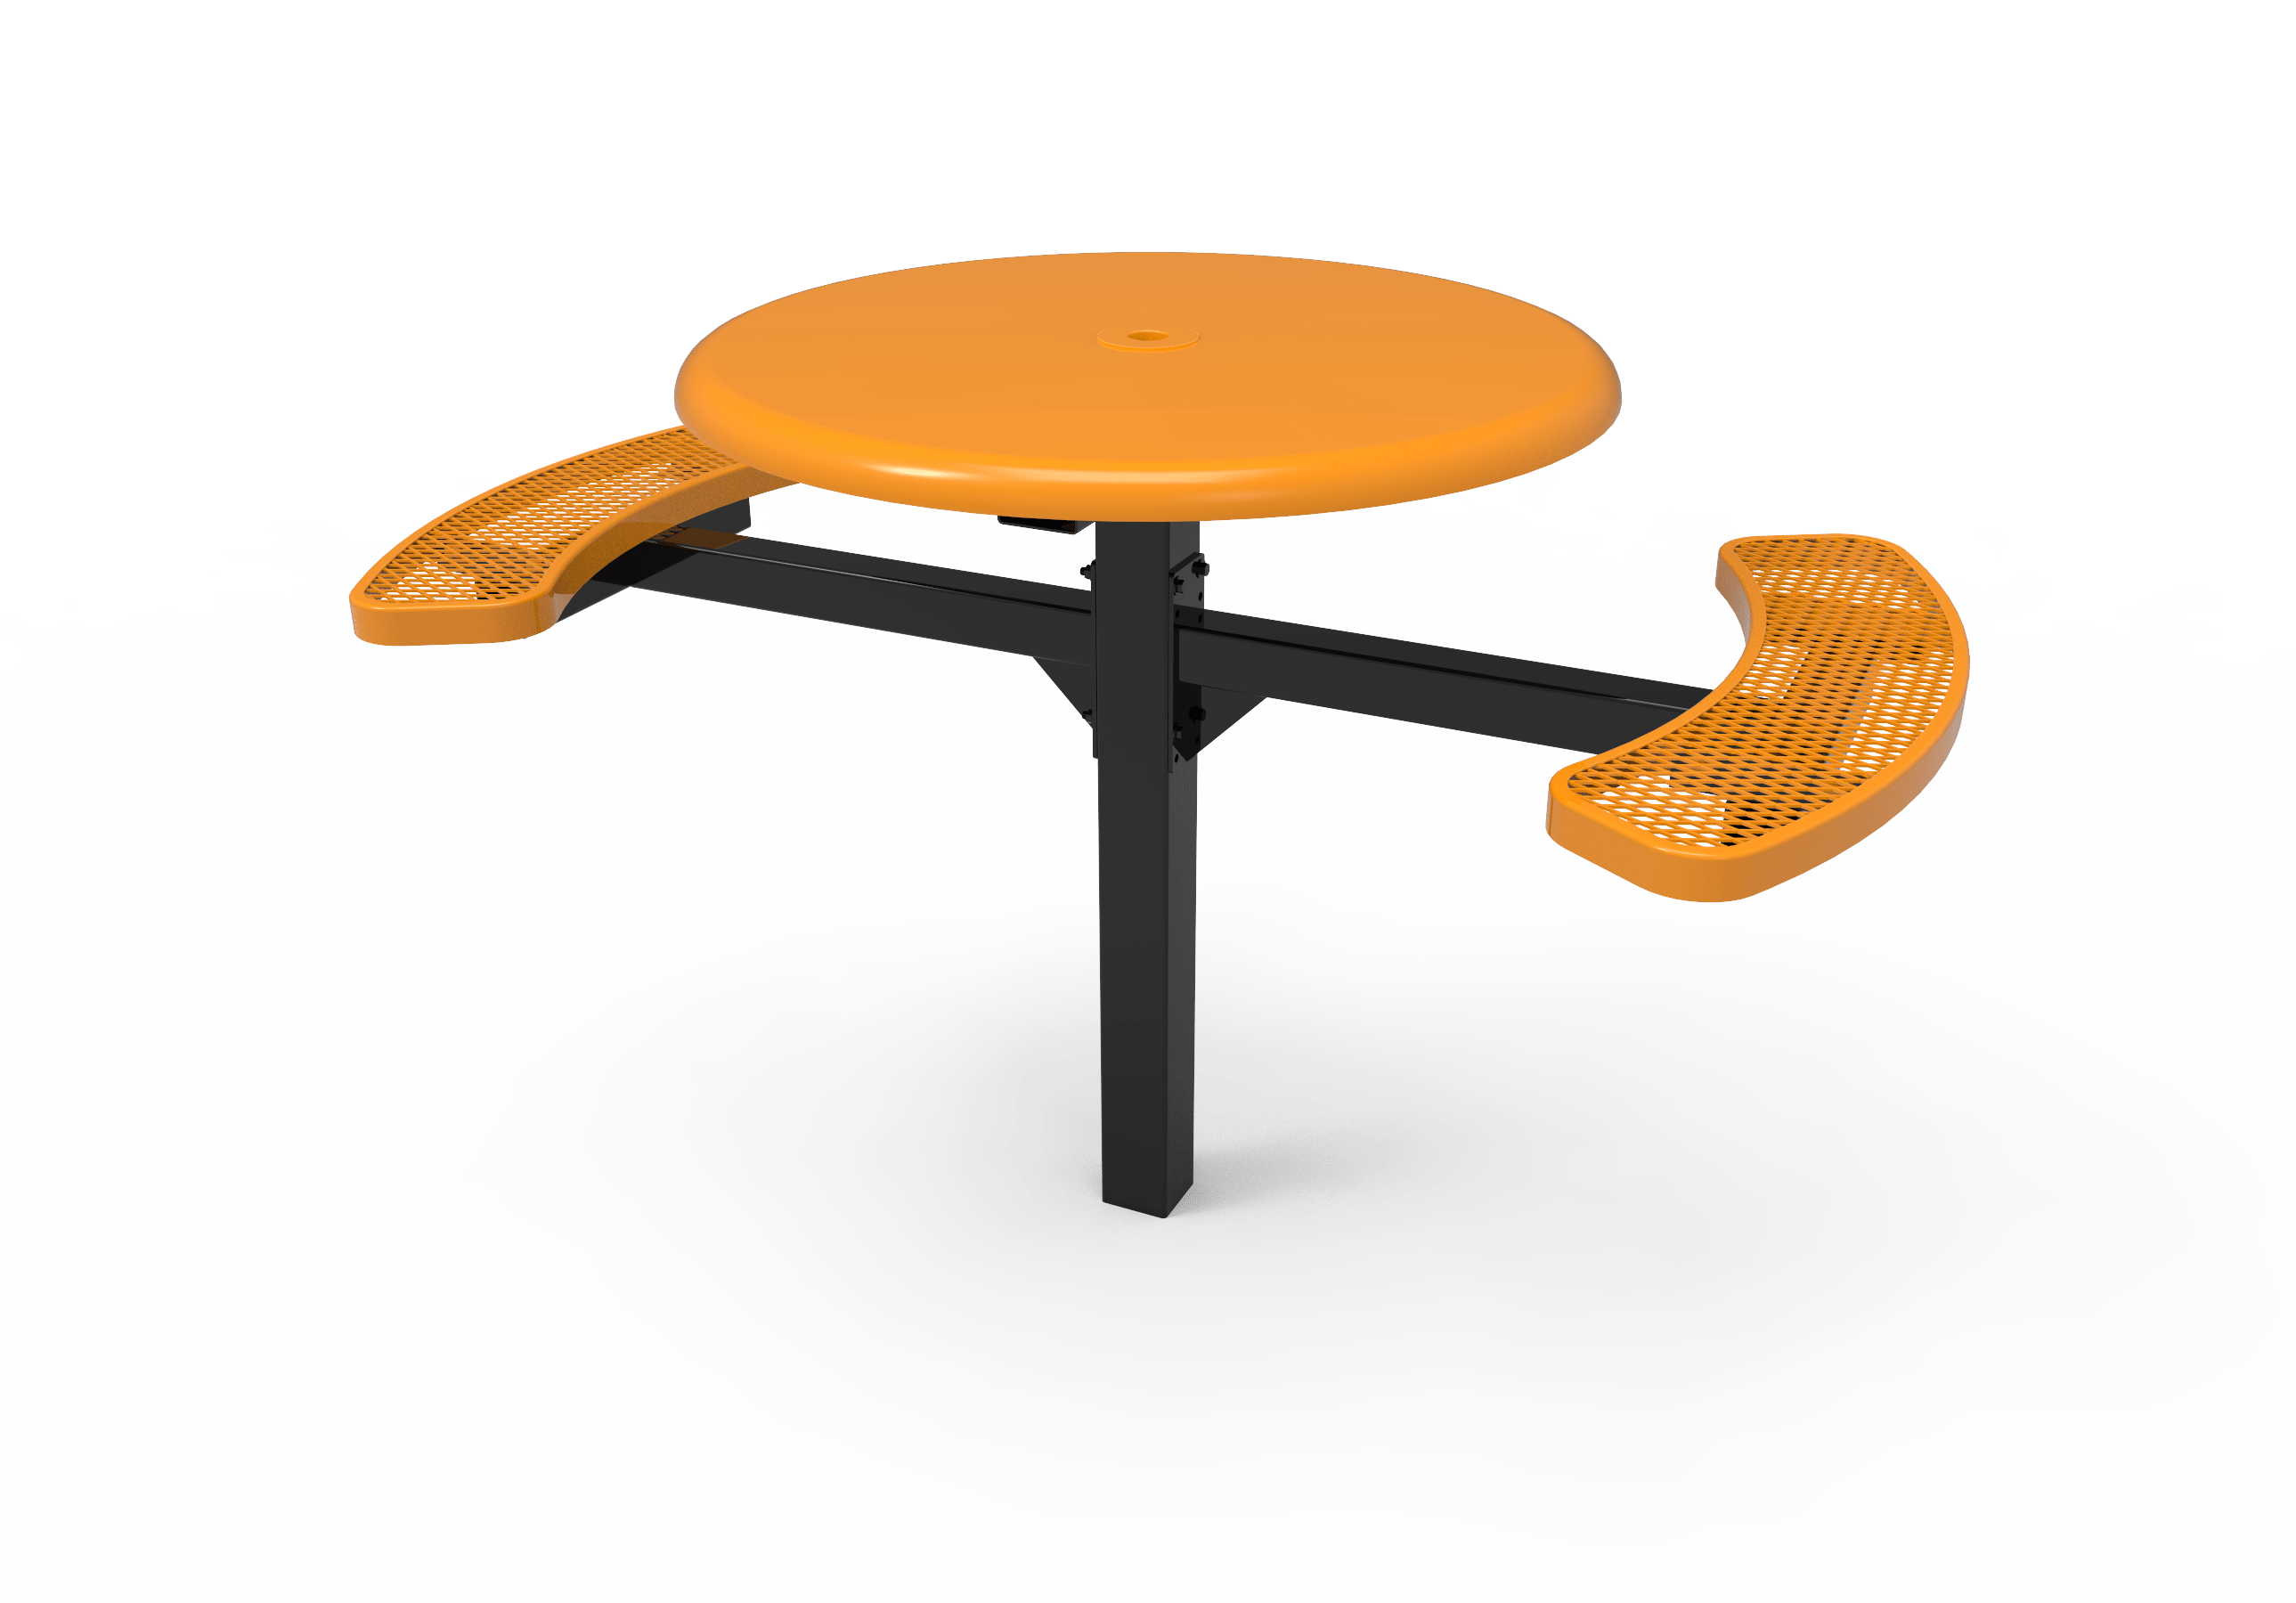 46″ Round Solid Top Pedestal In Ground Table 2 Seat-Mesh
TRS46-C-16-002
Industry Standard Finish
$1619.00
TRS46-A-16-002
Advantage Premium Finish
$2079.00
